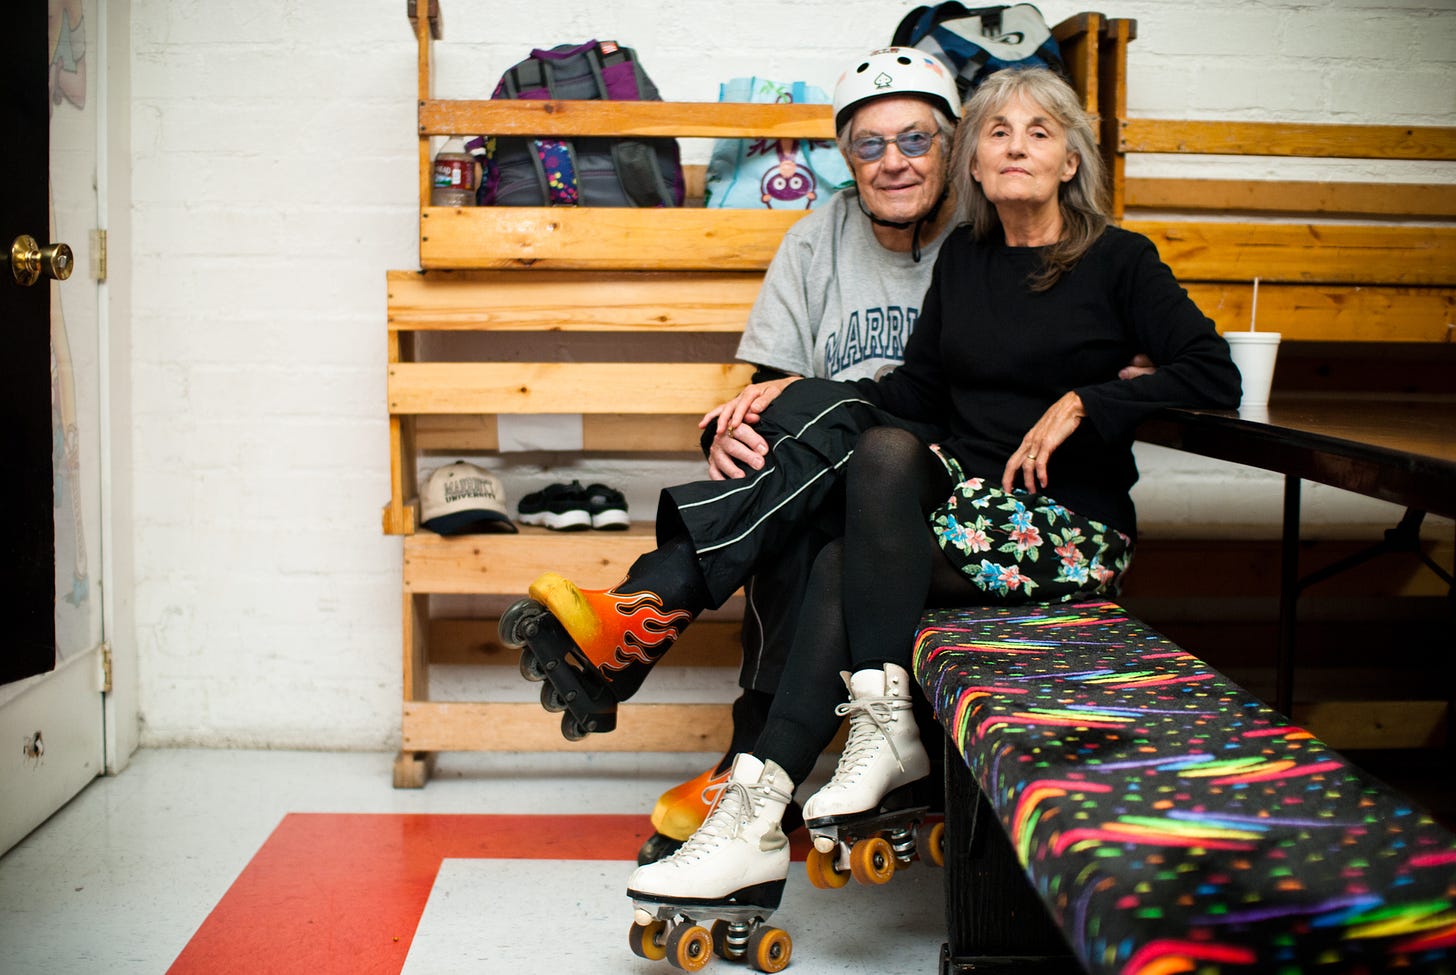 Bob and Jane, pictured here in 2011, used to come to Moonlight nearly every week and always skated as a couple. Bob even kept coming to skate after breaking one hip, and then the other. He finally had to retire his skates a couple years ago.